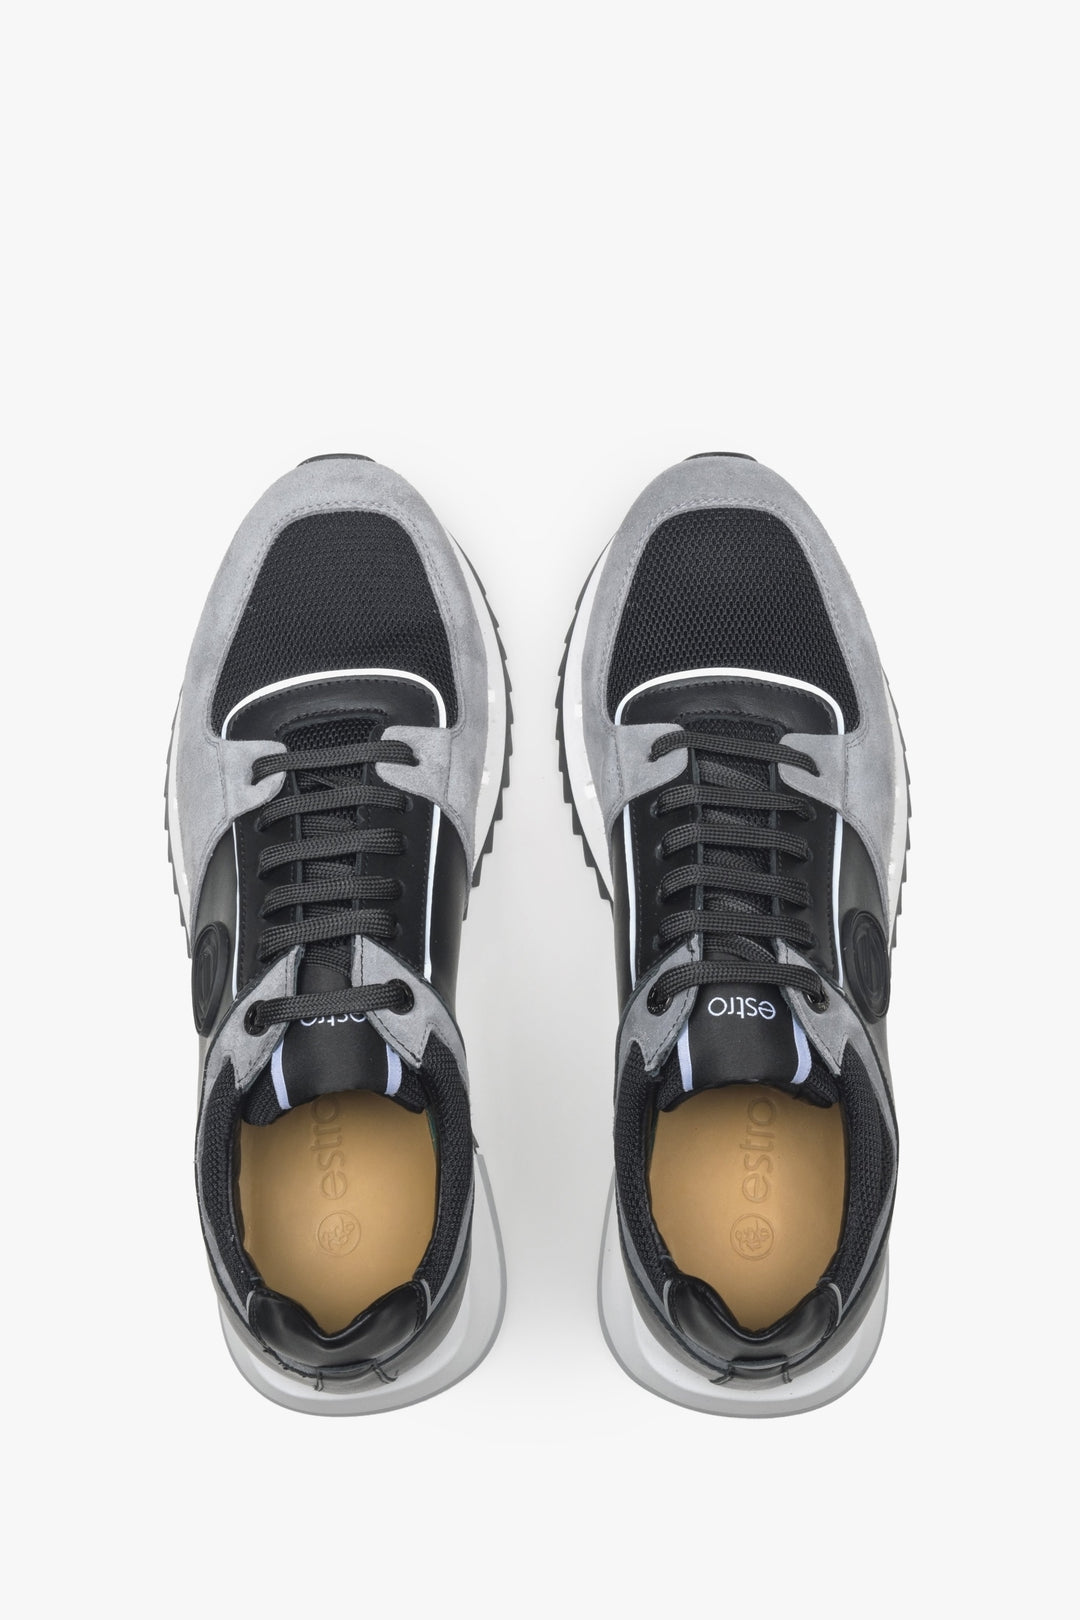 Men's black and grey sneakers made of velour - top view presentation of the footwear.